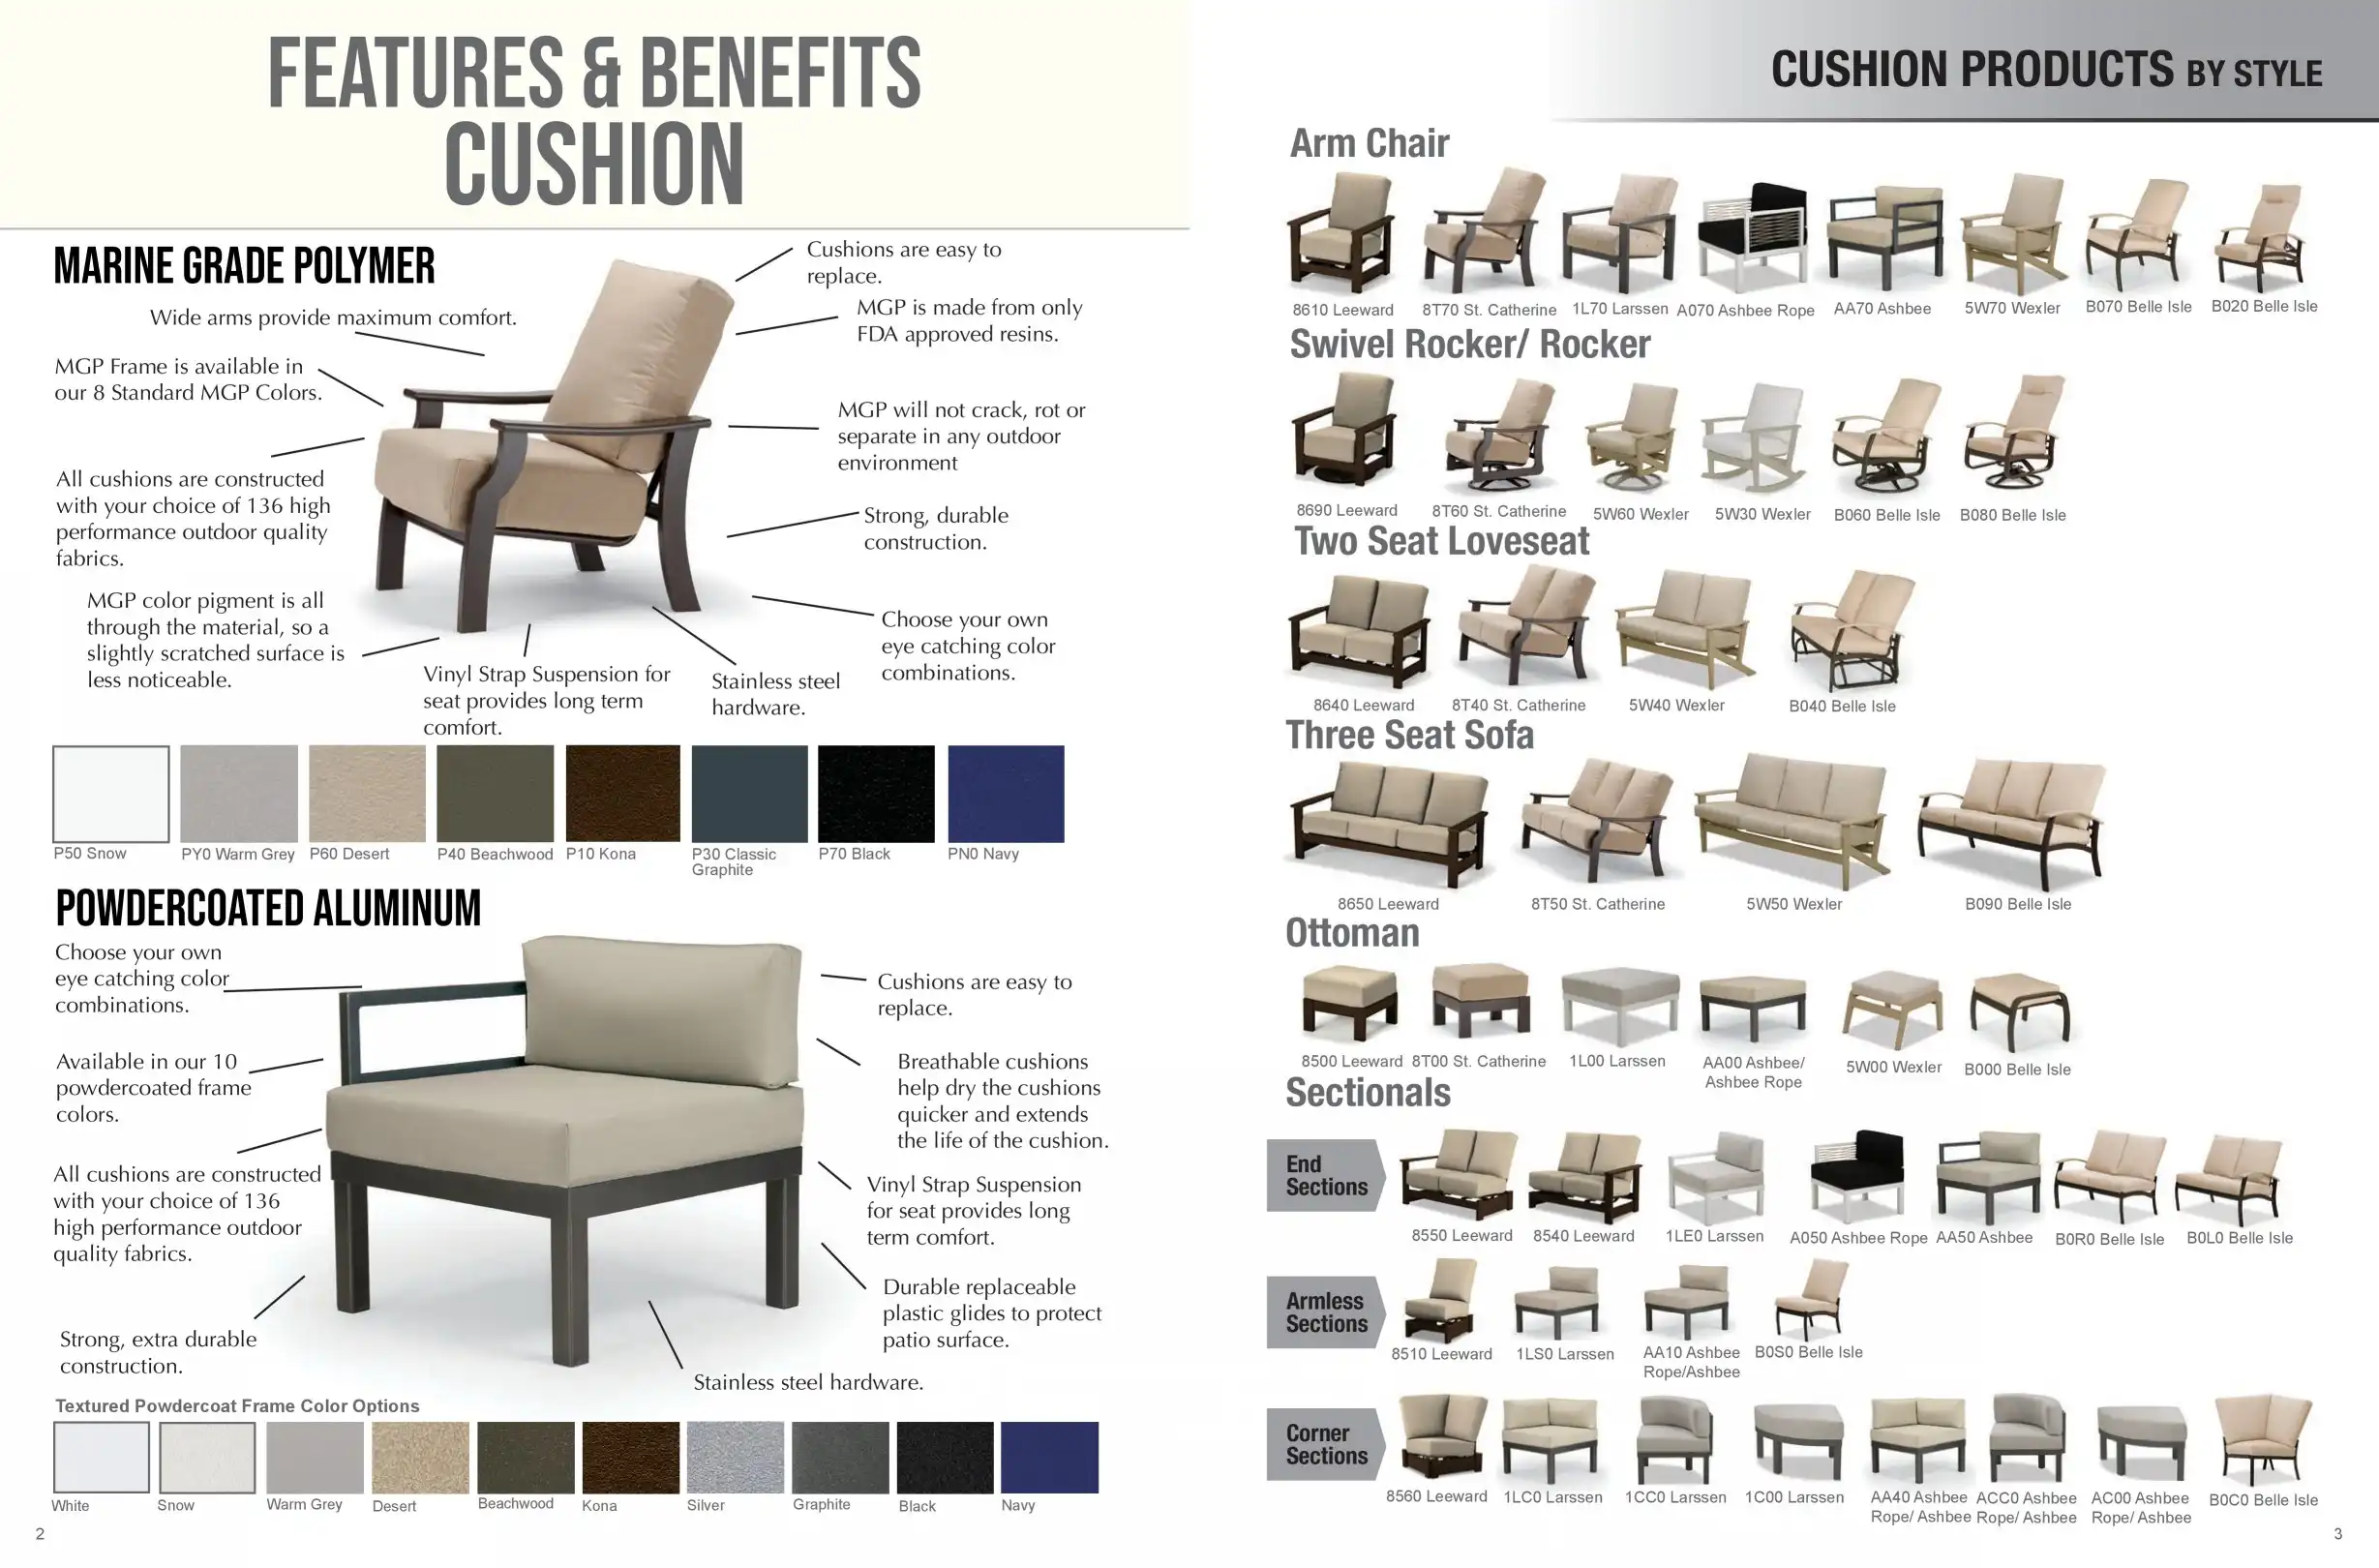 CUSHION Products Features, Benefits & Styles by Telescope Casual Residential